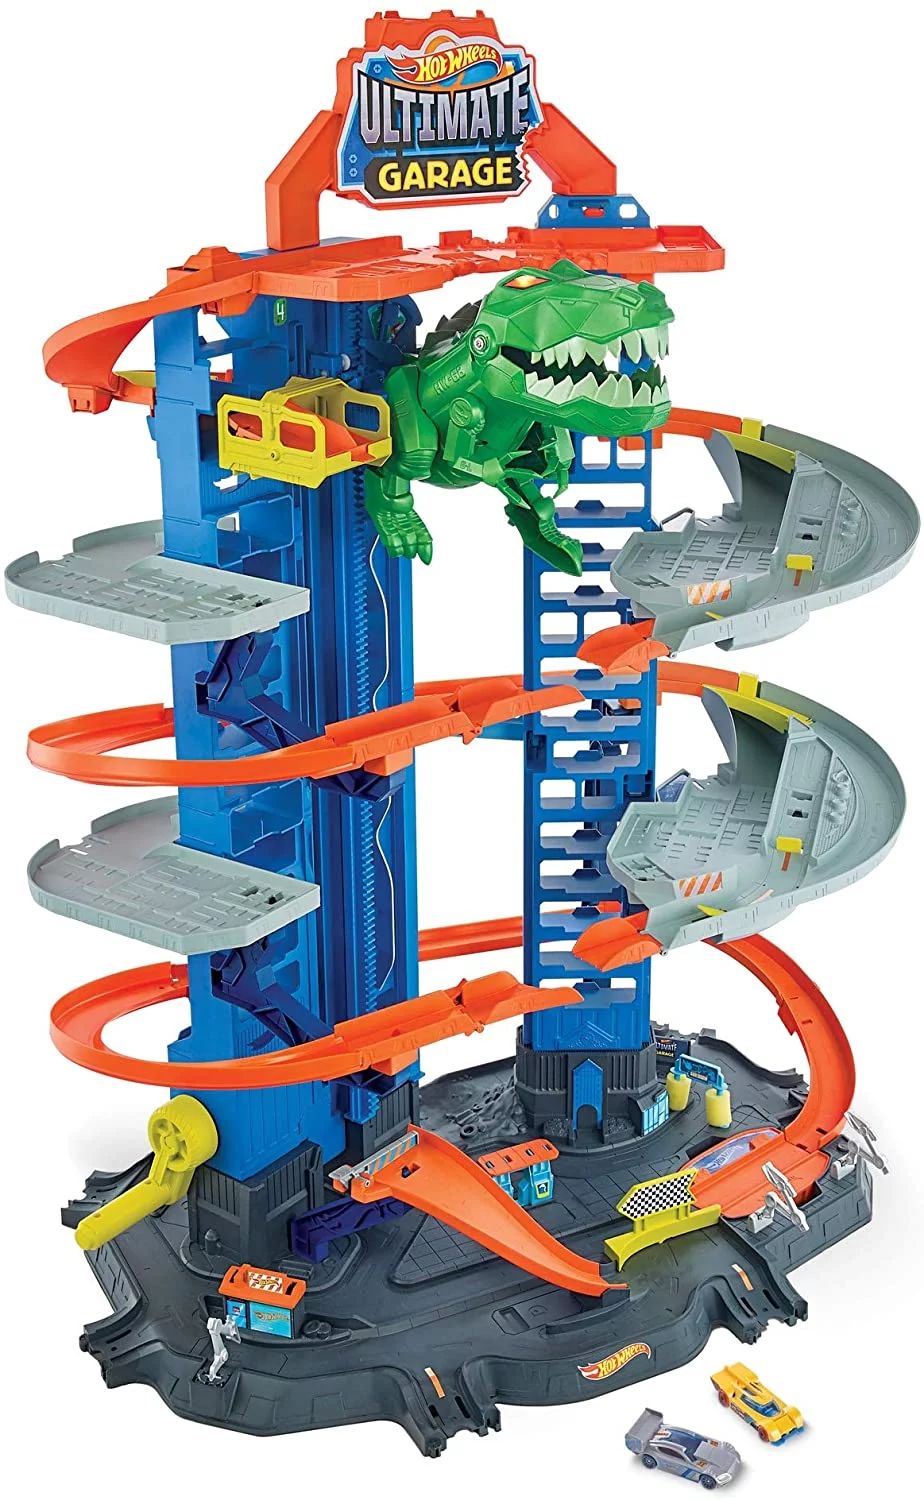 Hot Wheels City Ultimate Garage Track Set with 2 Toy Cars, Garage Playset Features Multi-Level Ra... | Walmart (US)